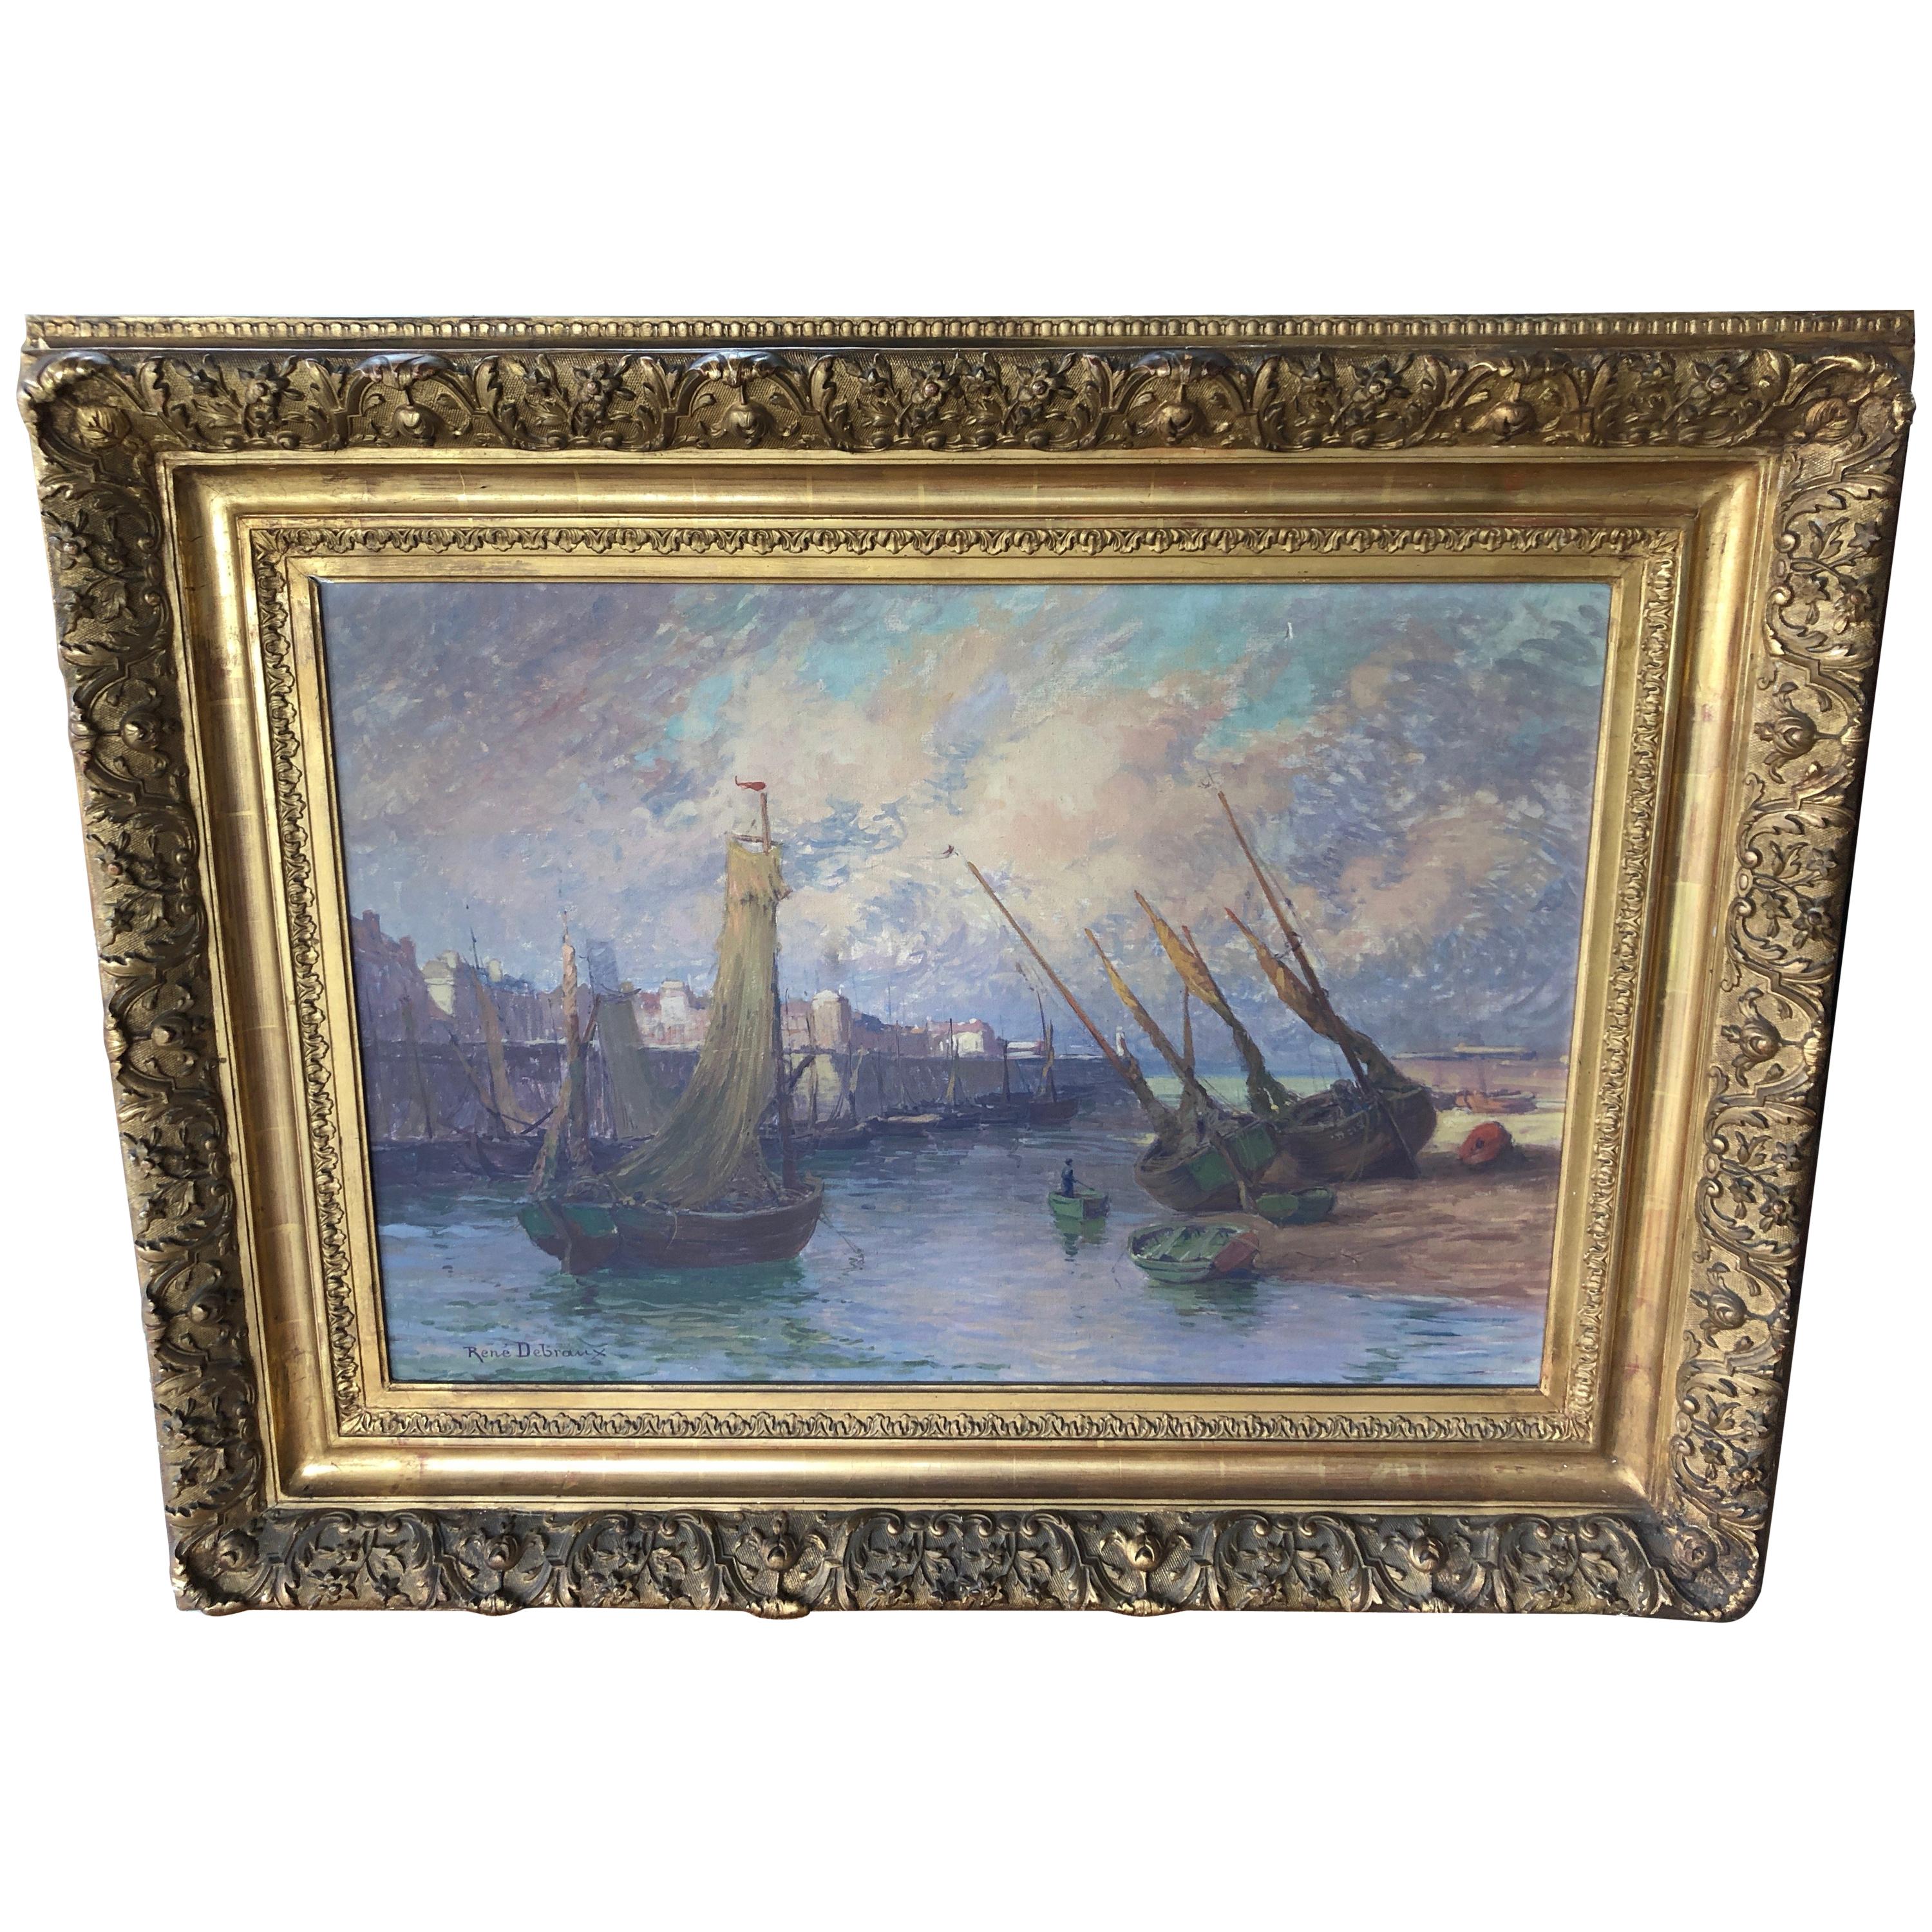 Impressive Large Original French Ship Painting by Rene Charles Louis Debraux